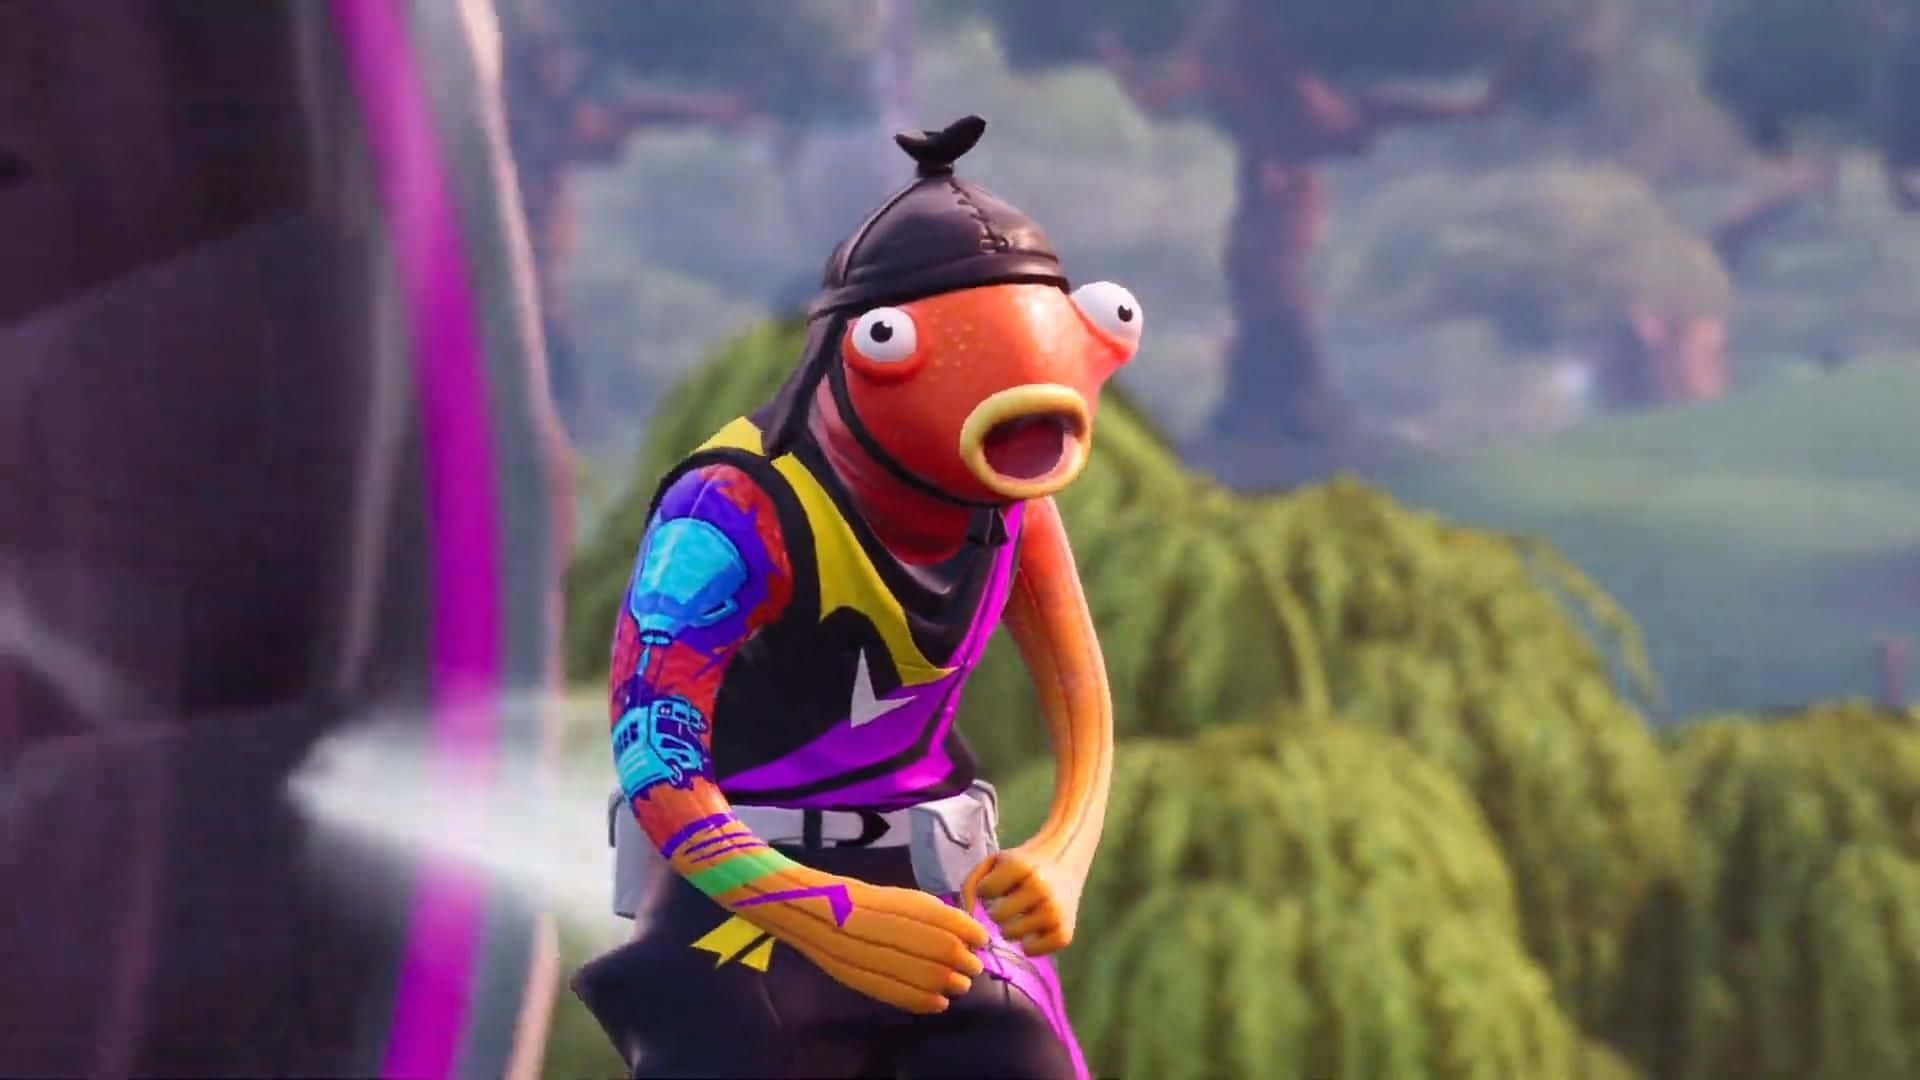 Play as Fishstick with Fortnite's mobile battle royale Wallpaper